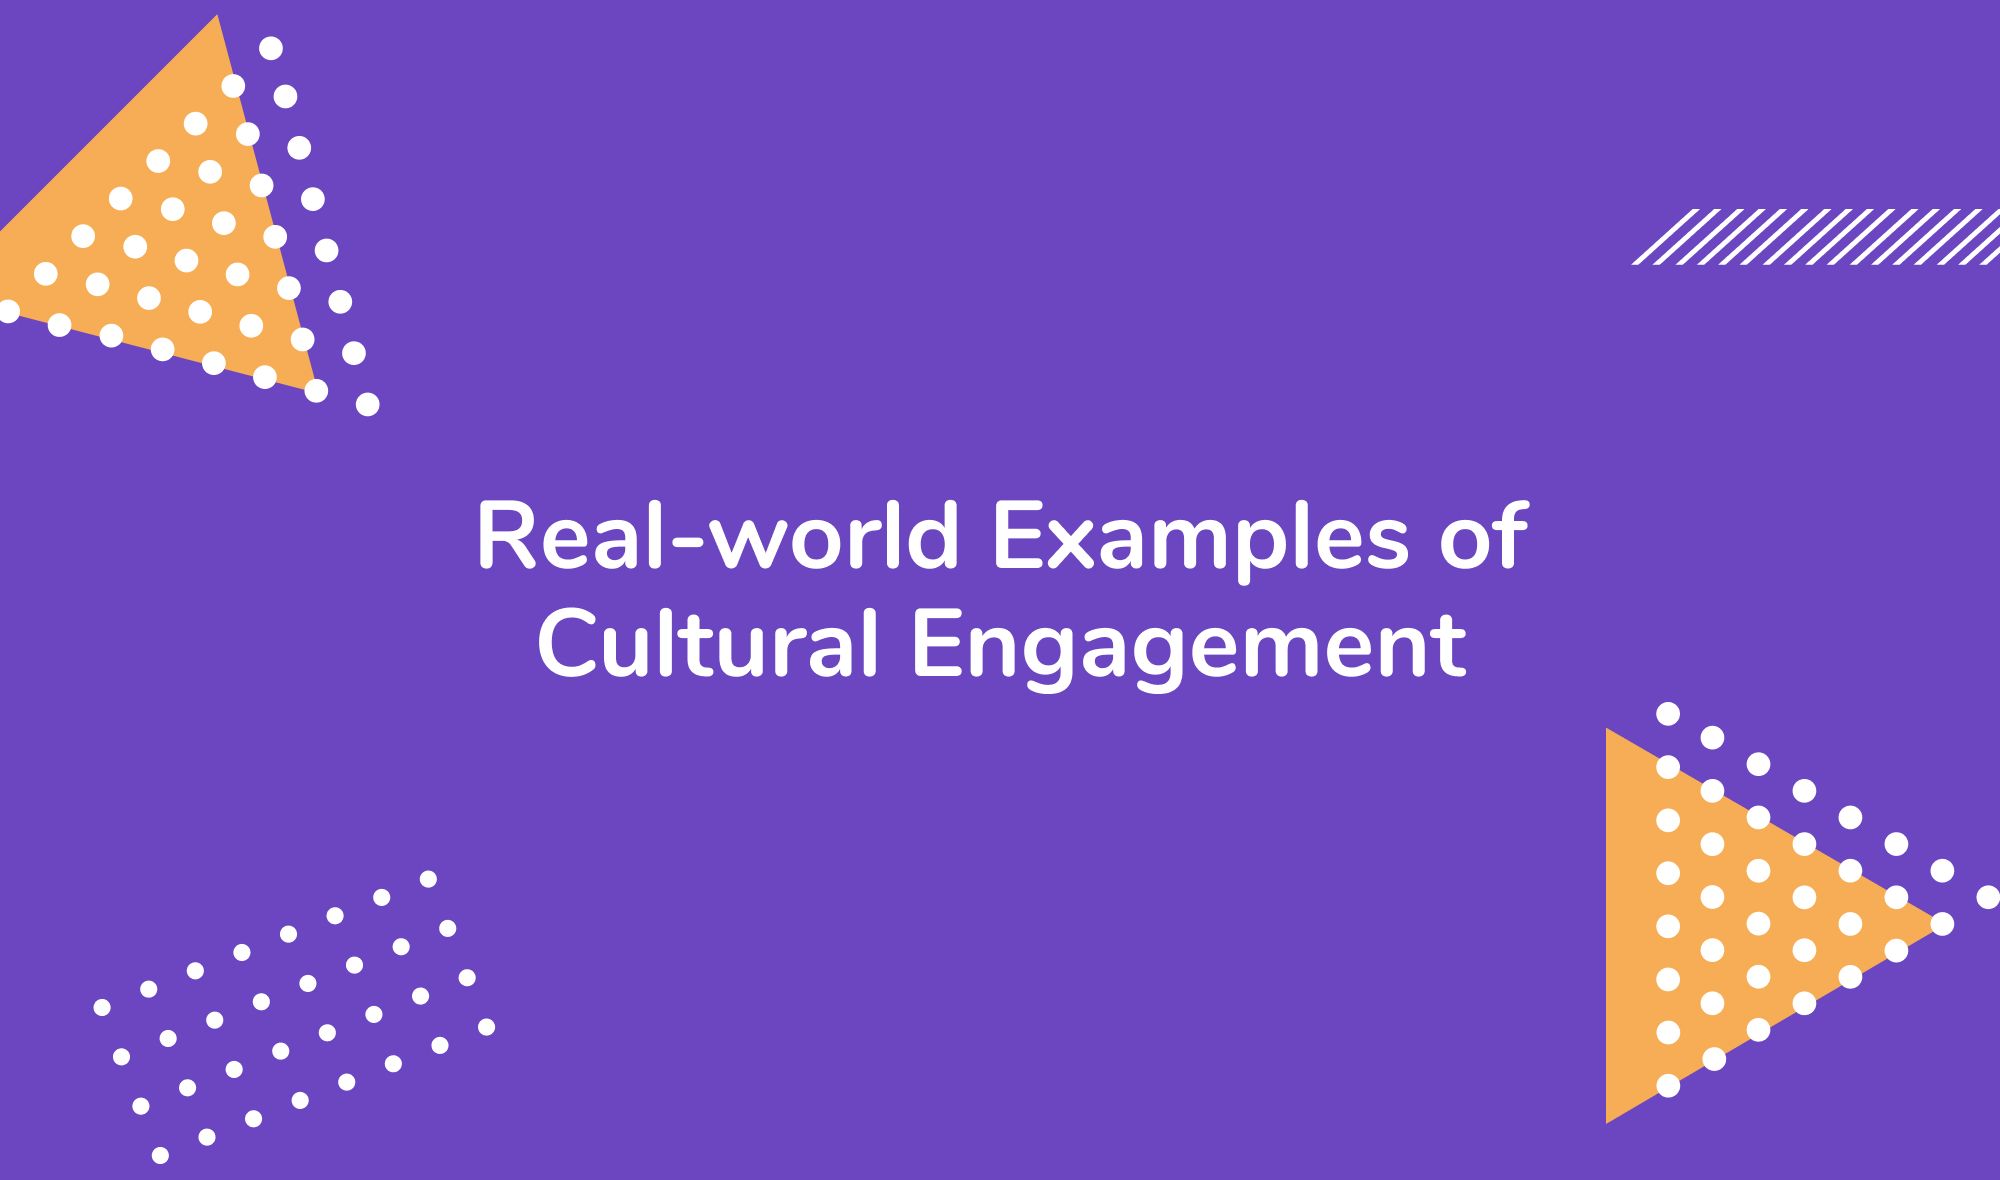 Case Studies: Real-world Examples of Cultural Engagement